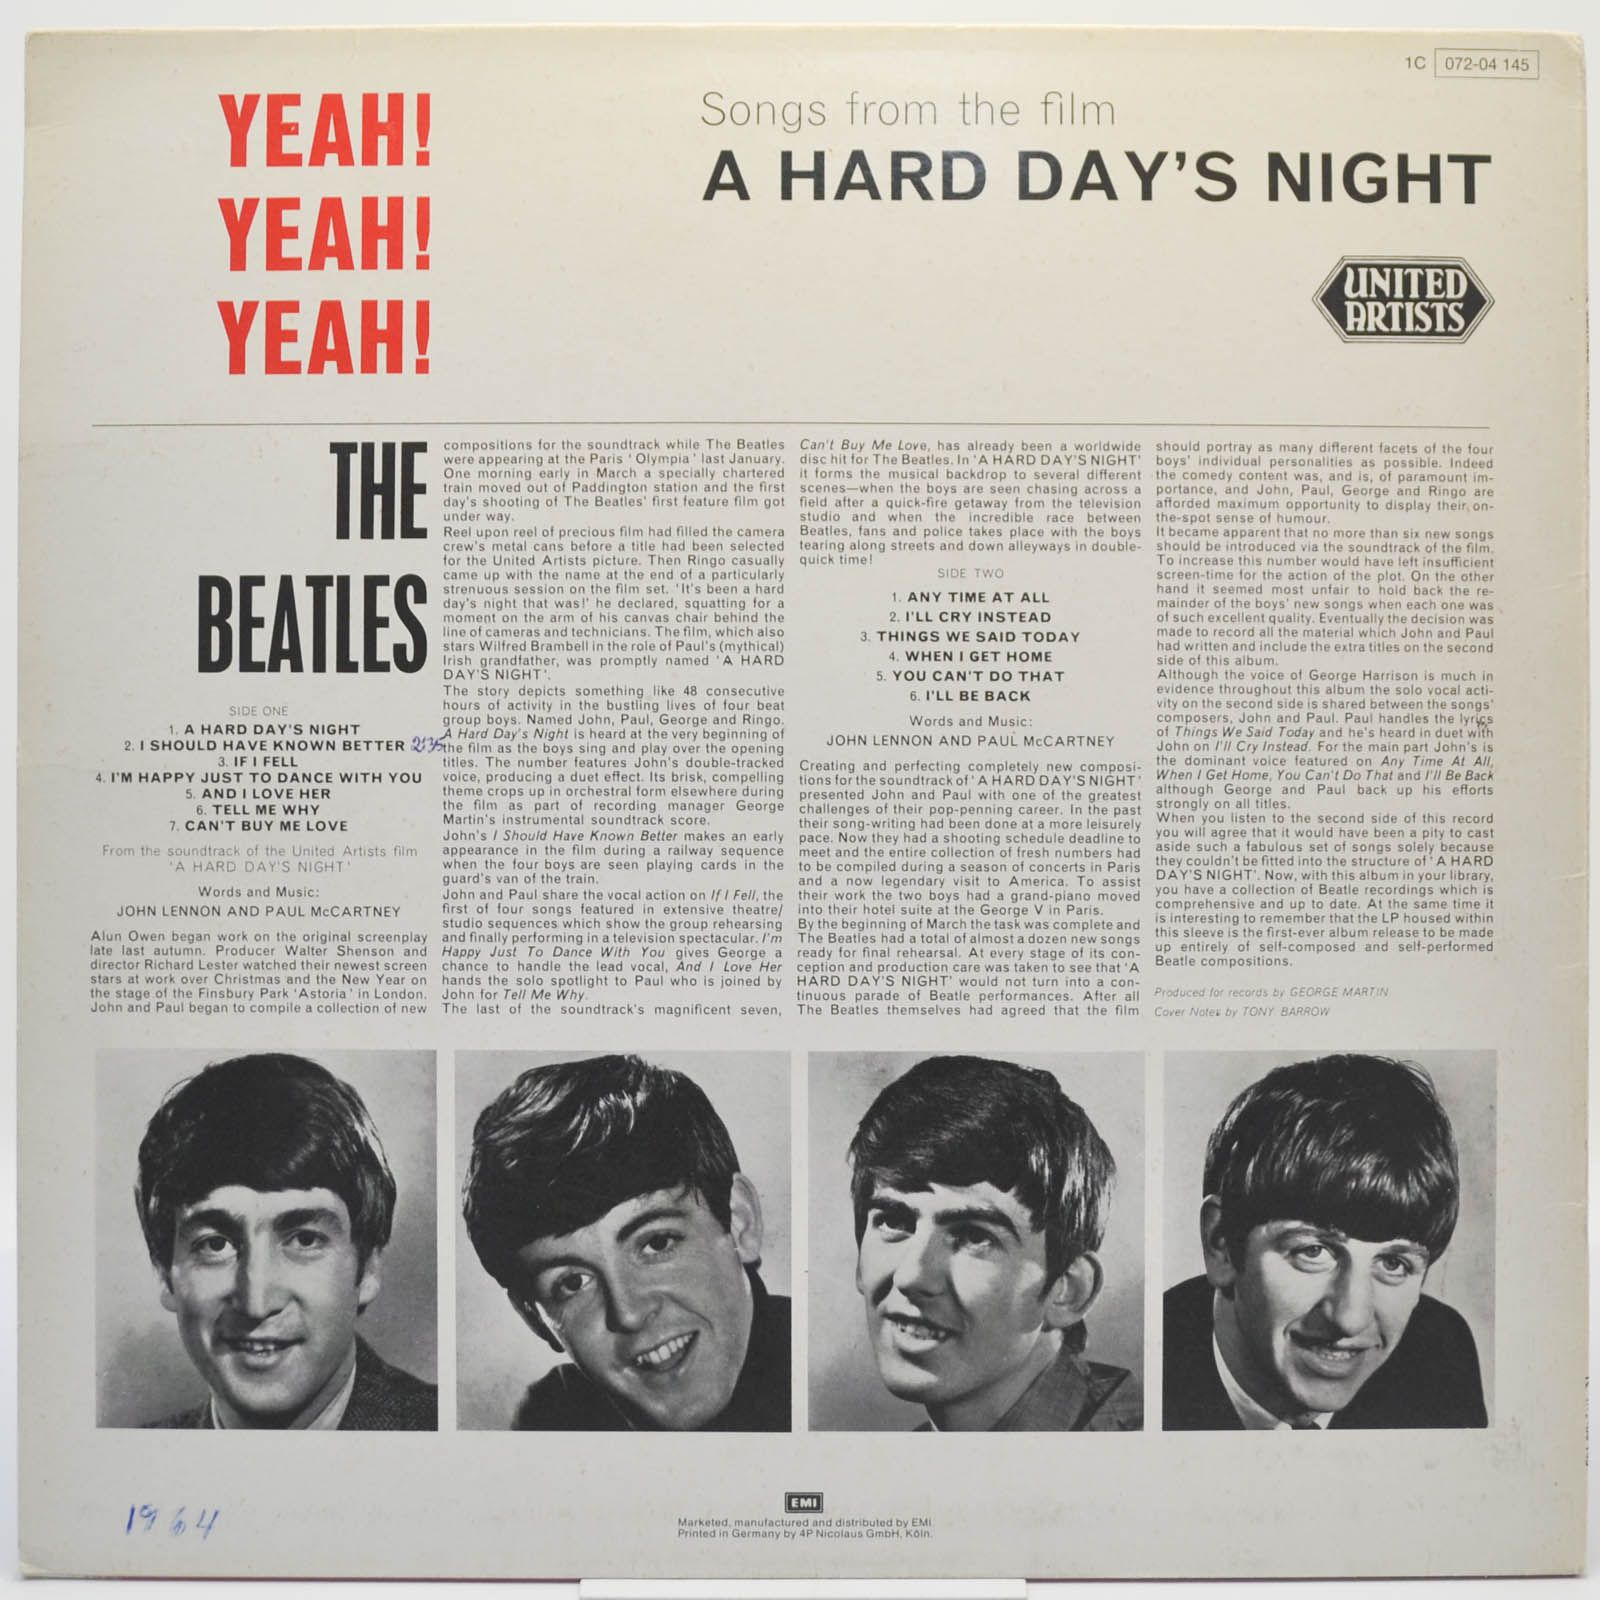 Beatles — Yeah! Yeah! Yeah! (A Hard Day's Night) - Originals From The United Artists Picture, 1964